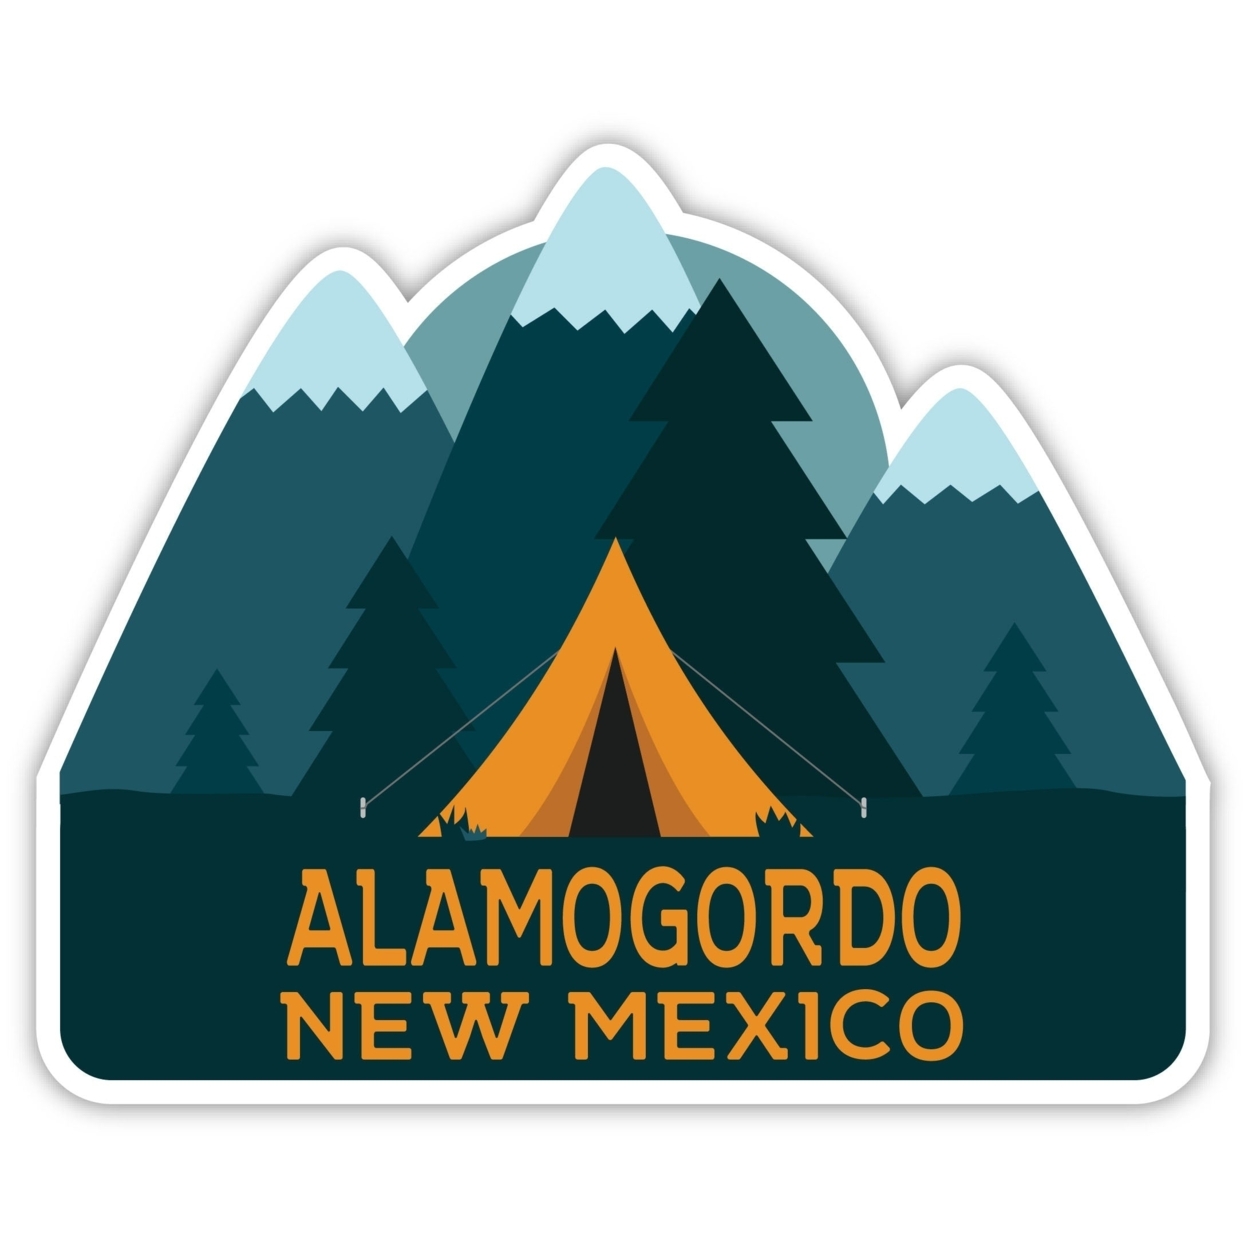 Alamogordo New Mexico Souvenir Decorative Stickers (Choose Theme And Size) - 4-Pack, 10-Inch, Camp Life